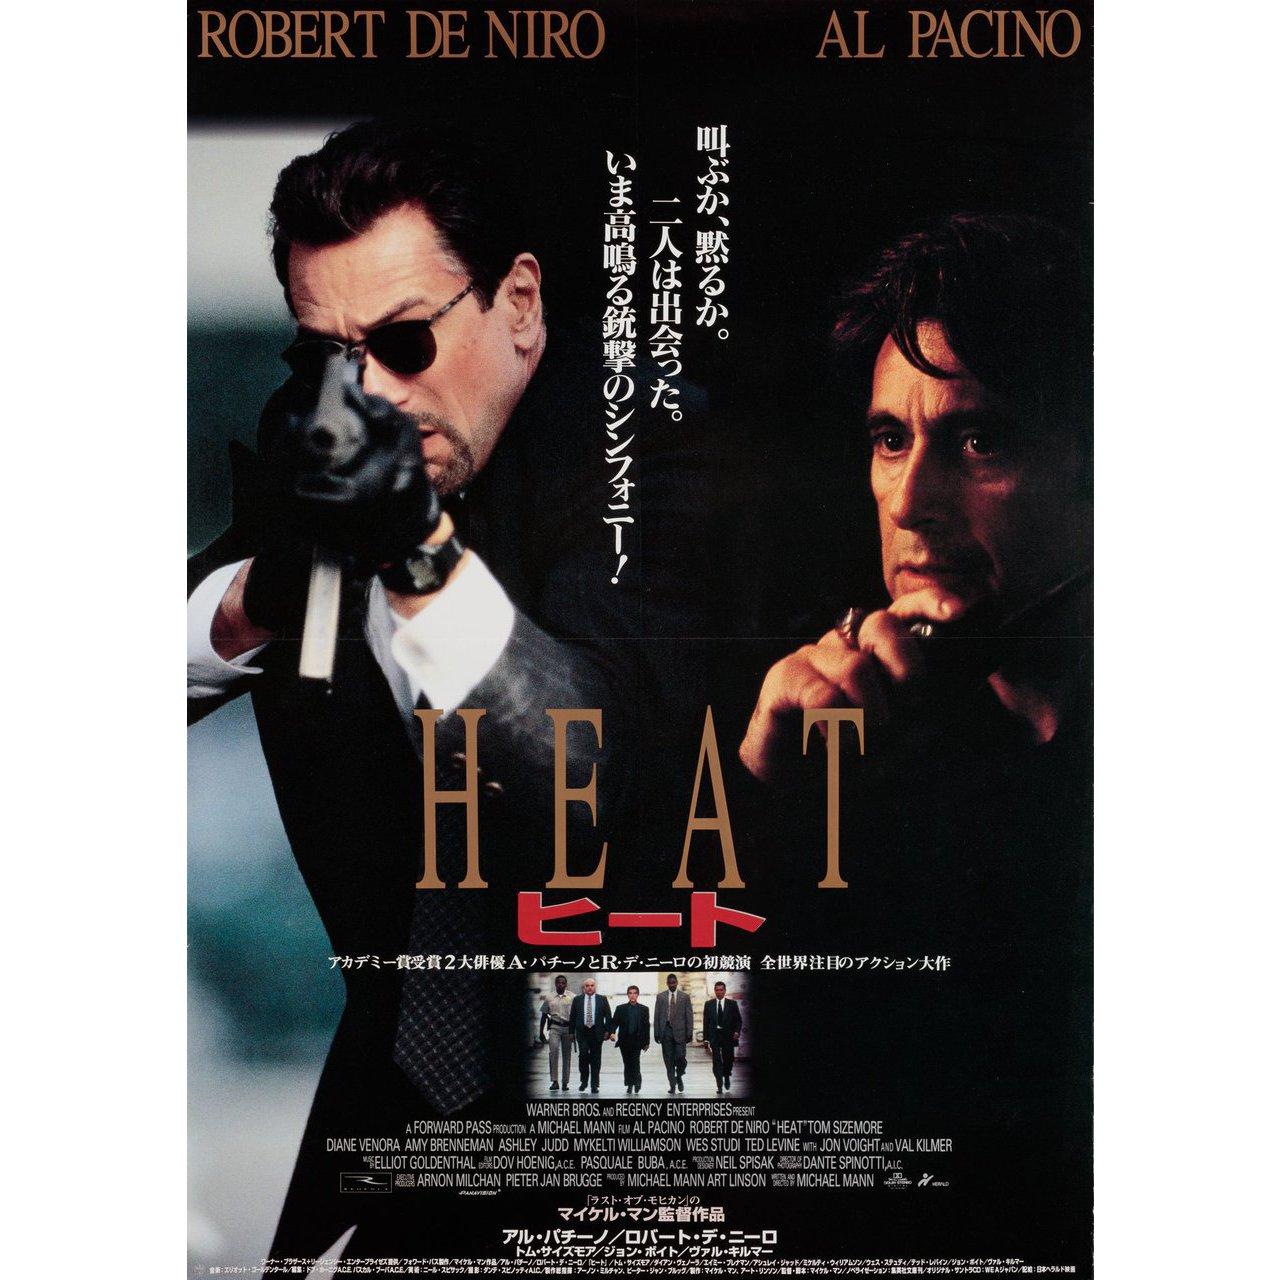 Original 1995, Japanese B2 poster for the film Heat directed by Michael Mann with Al Pacino / Robert De Niro / Val Kilmer / Jon Voight. Very Good-Fine condition, folded. Many original posters were issued folded or were subsequently folded. Please